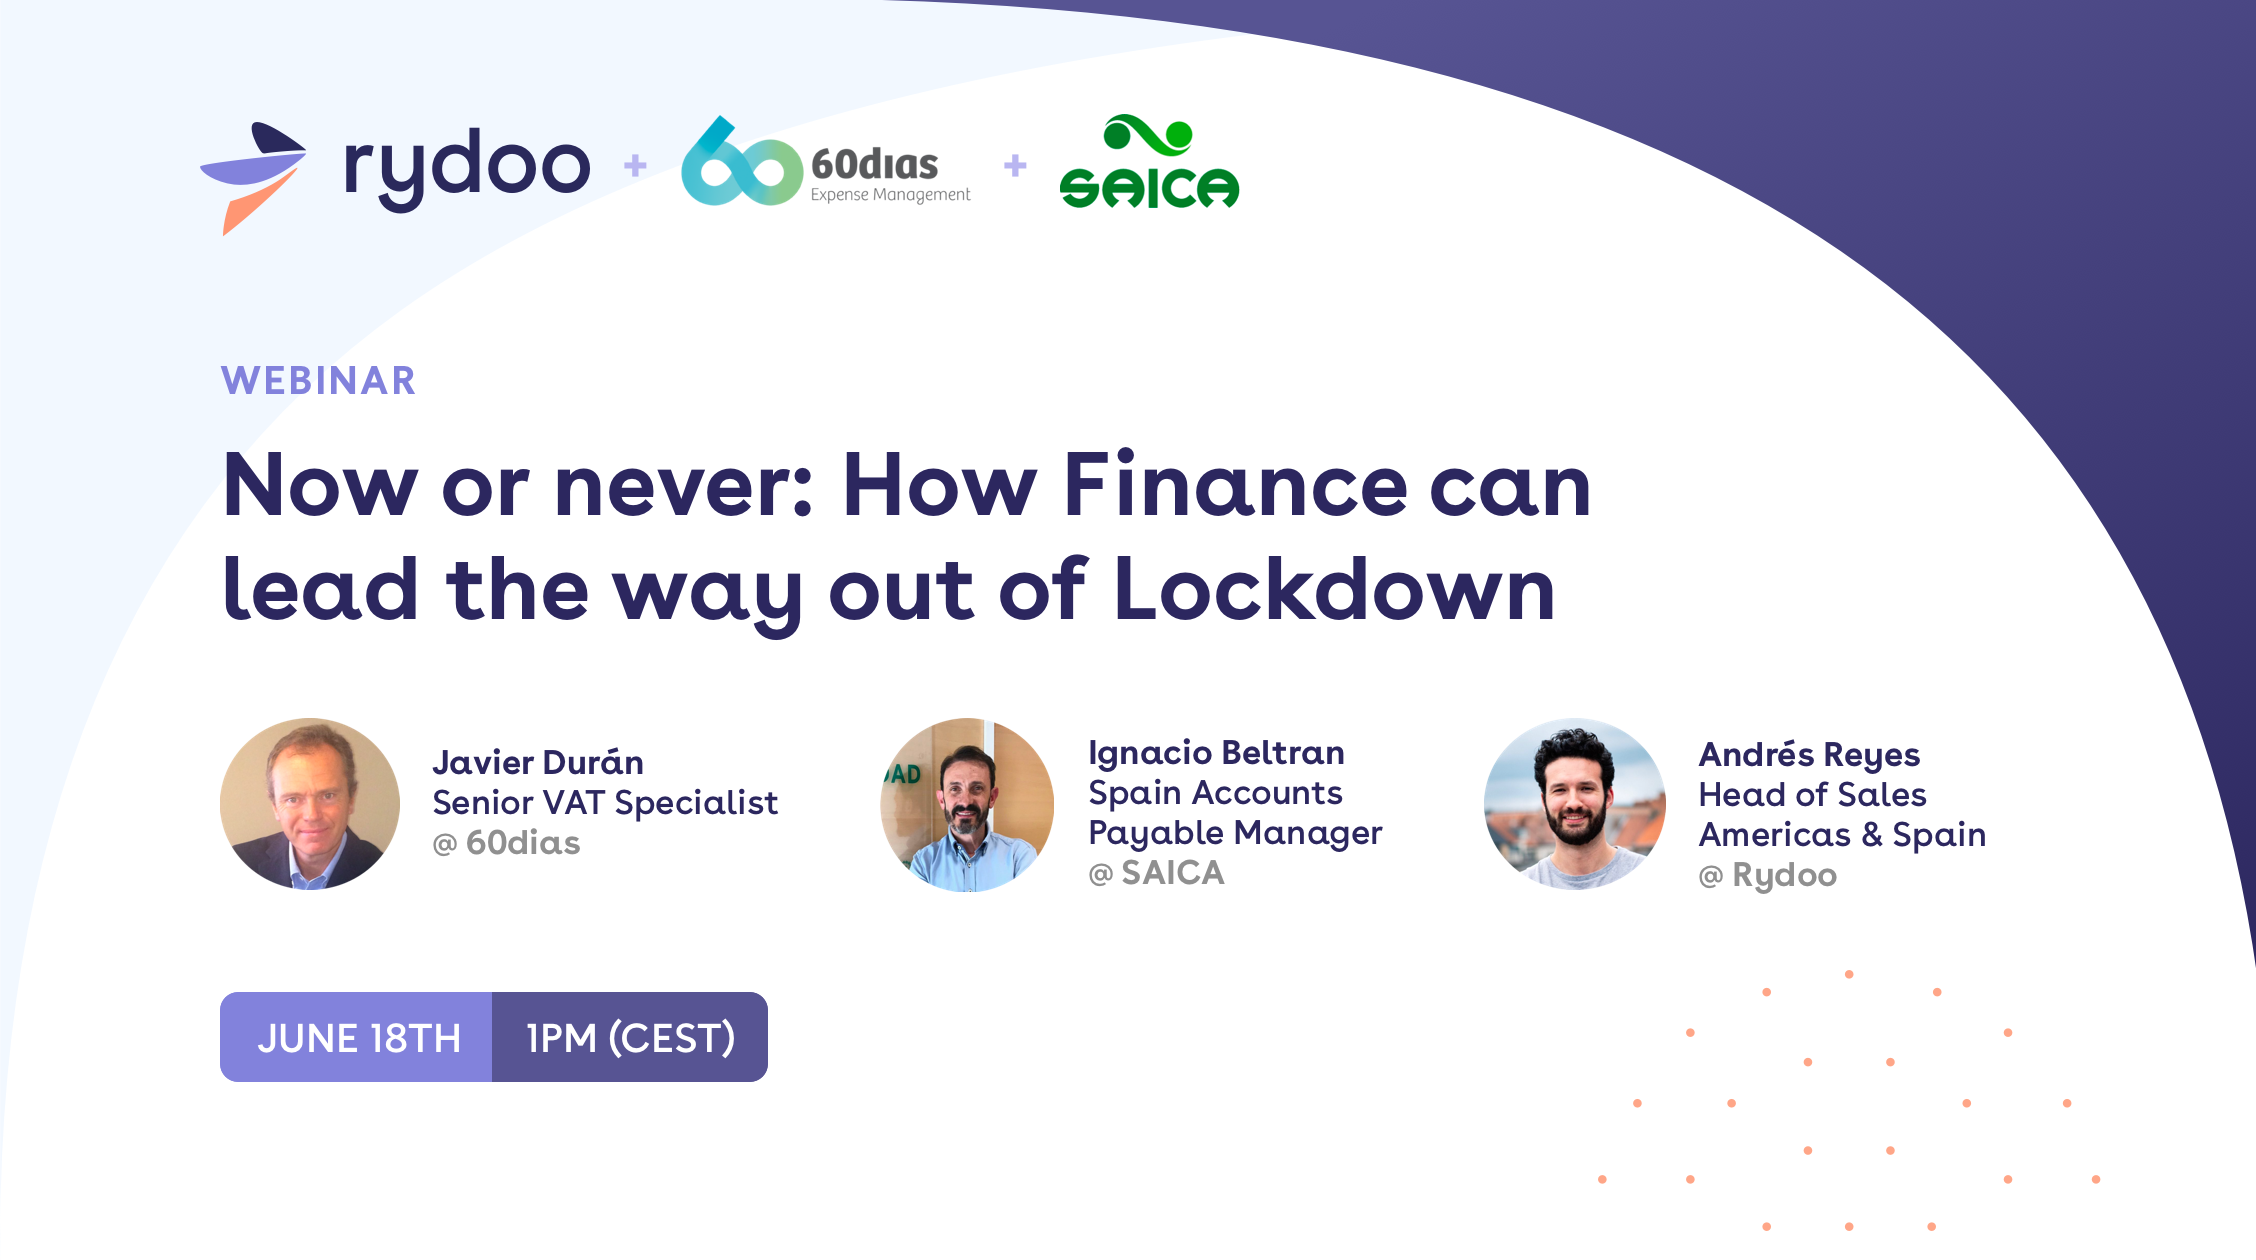 Now or never: How Finance can lead the way out of Lockdown